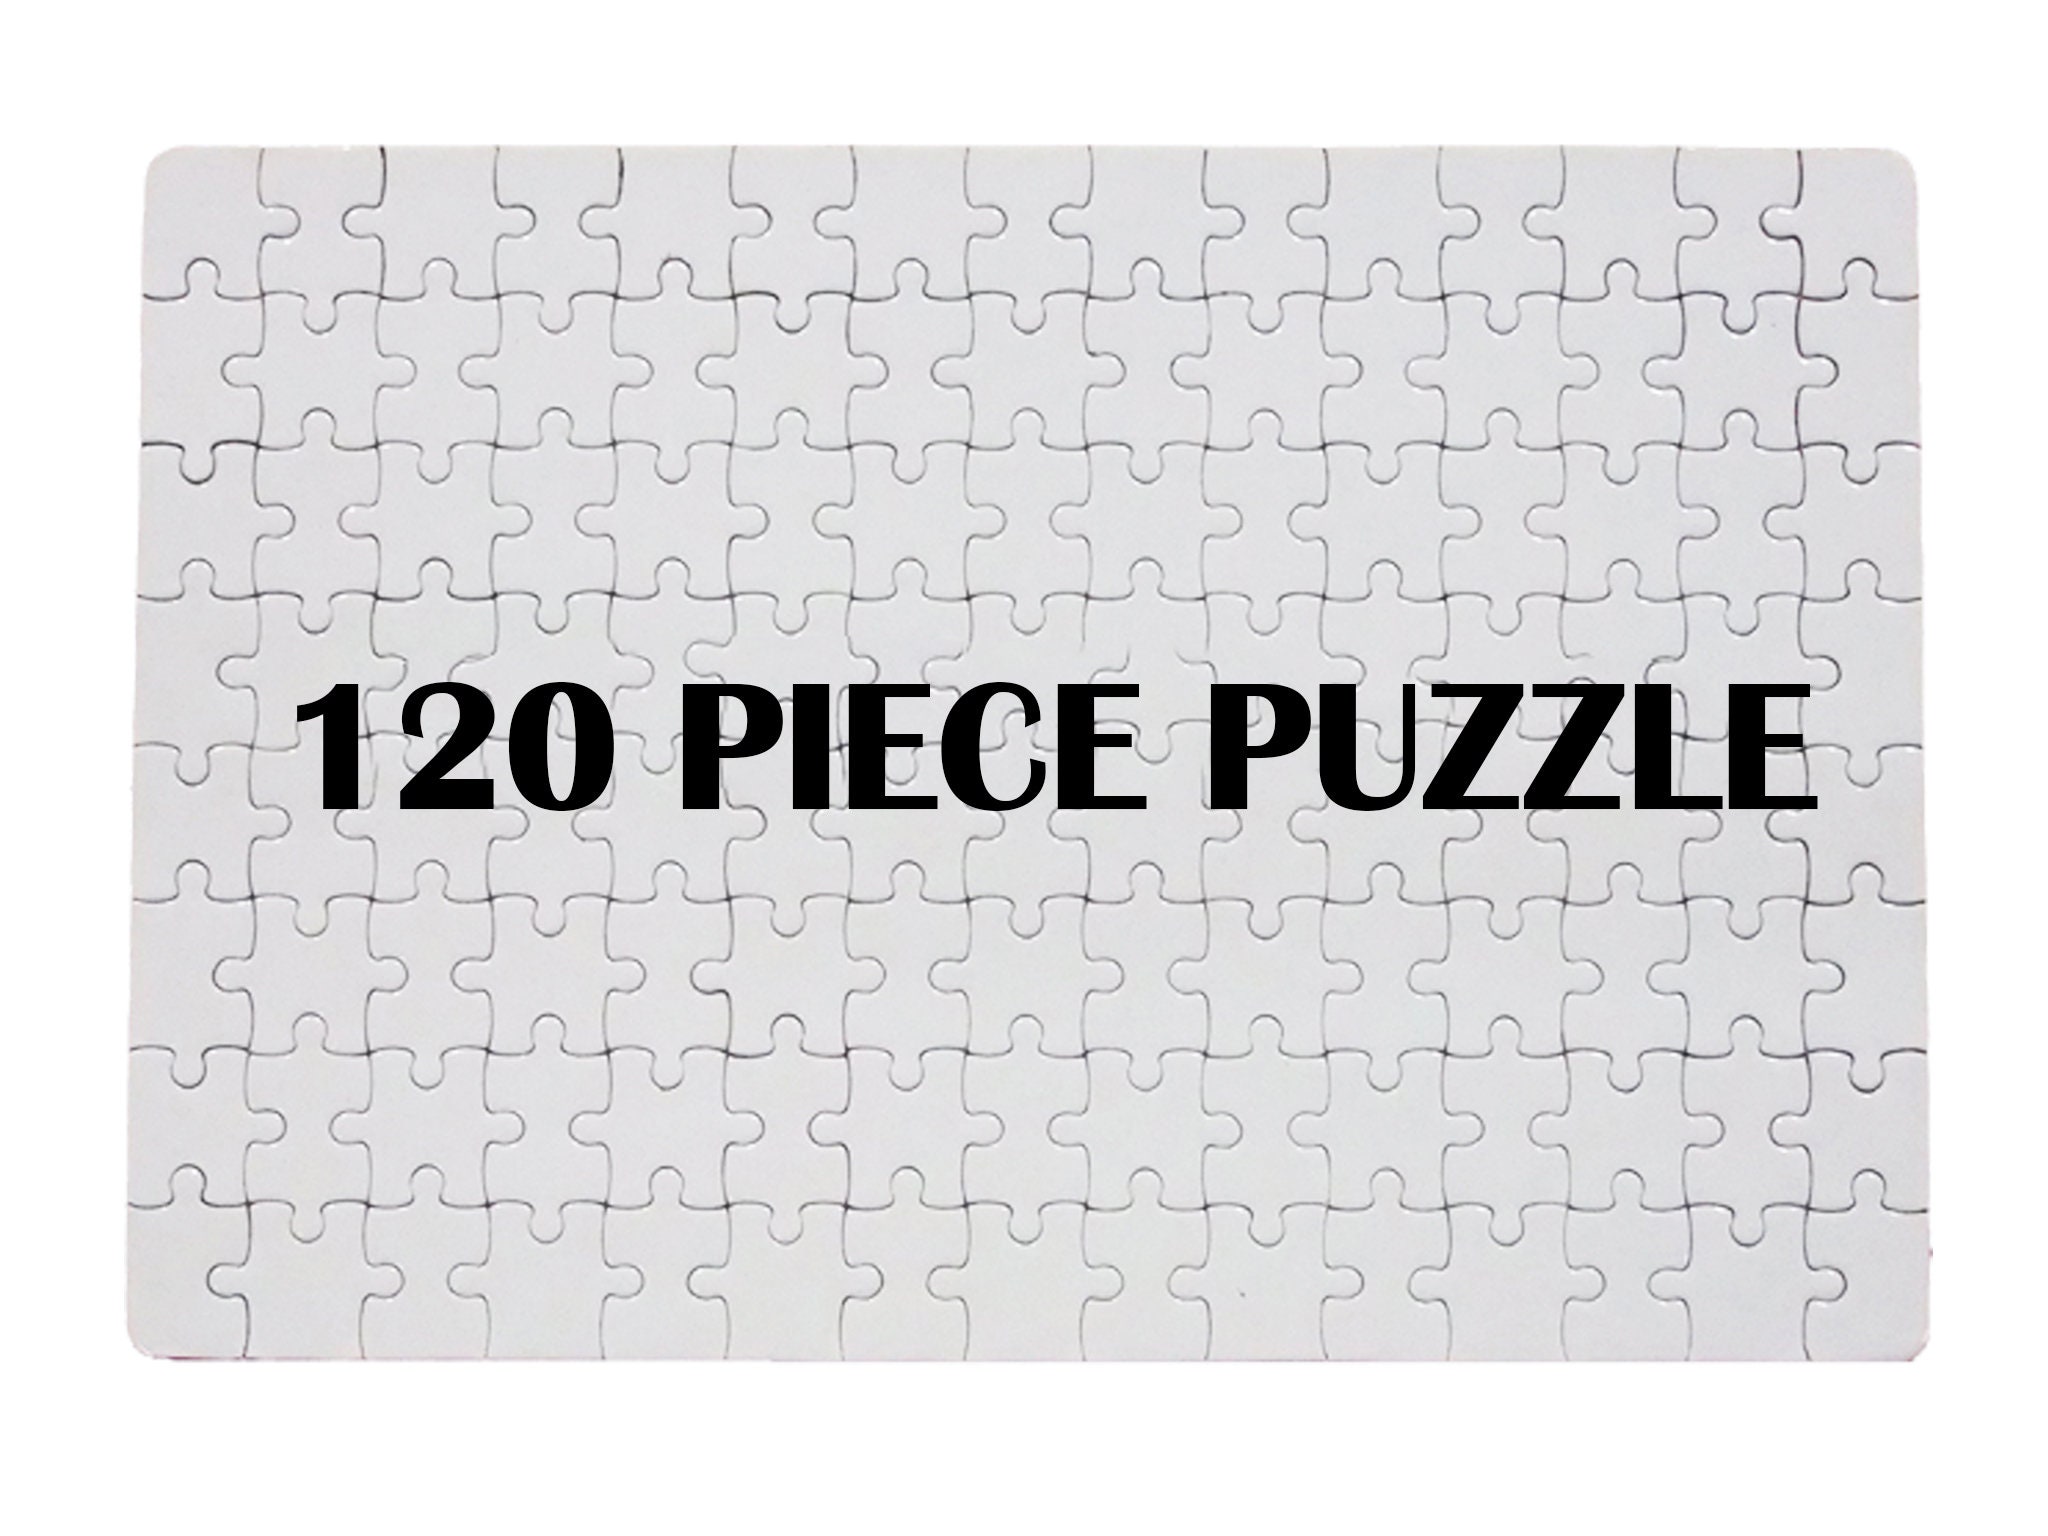 120 PIECE PUZZLE BLANK for Sublimation Printing 